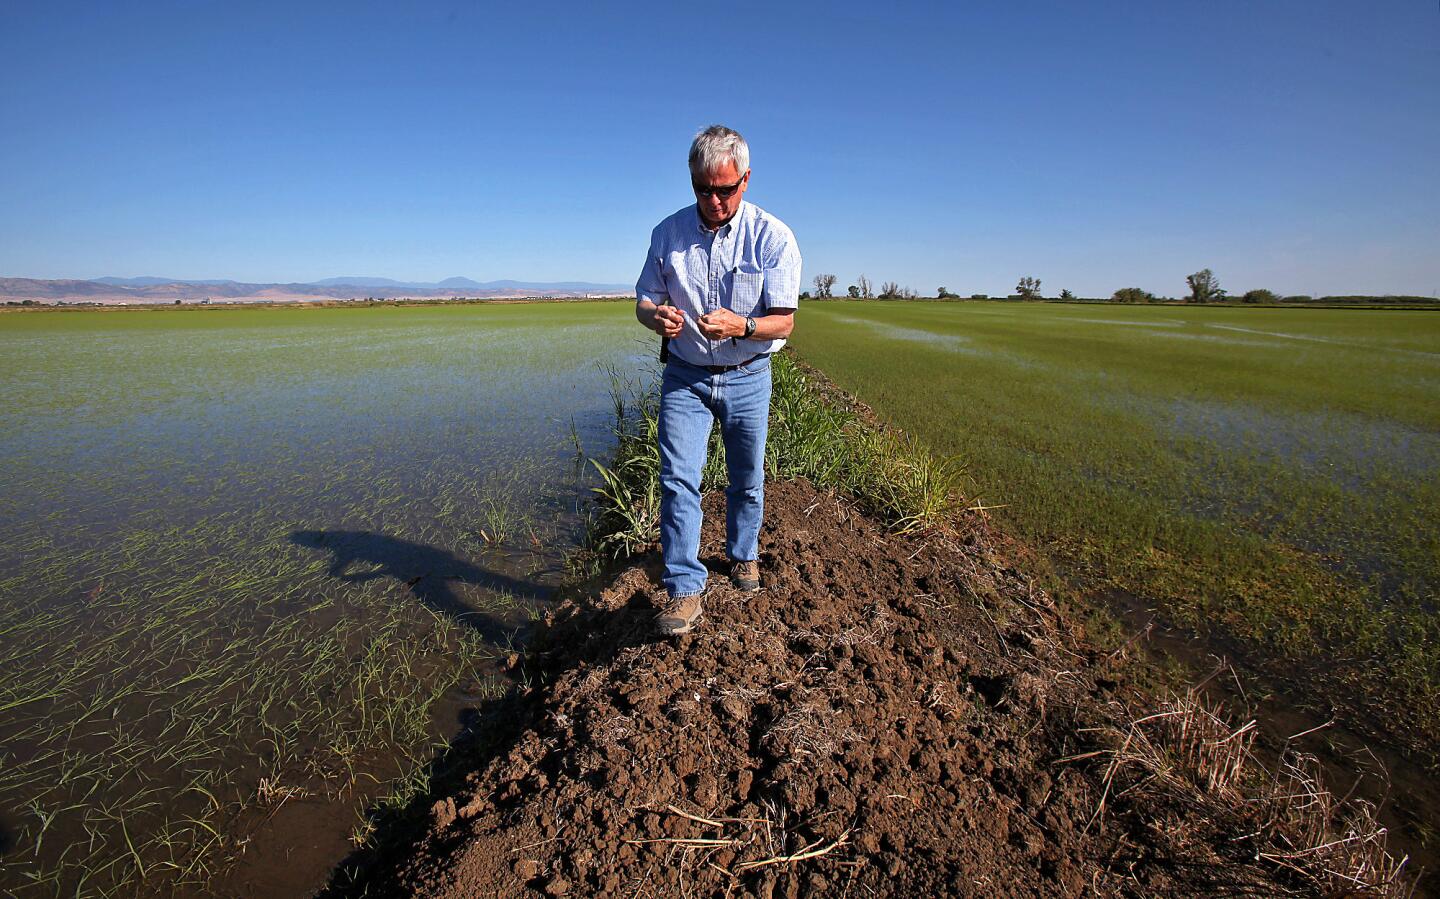 Rice farmer Don Bransford walks along a berm in one of his rice fields near the city of Williams in the Sacramento Valley.